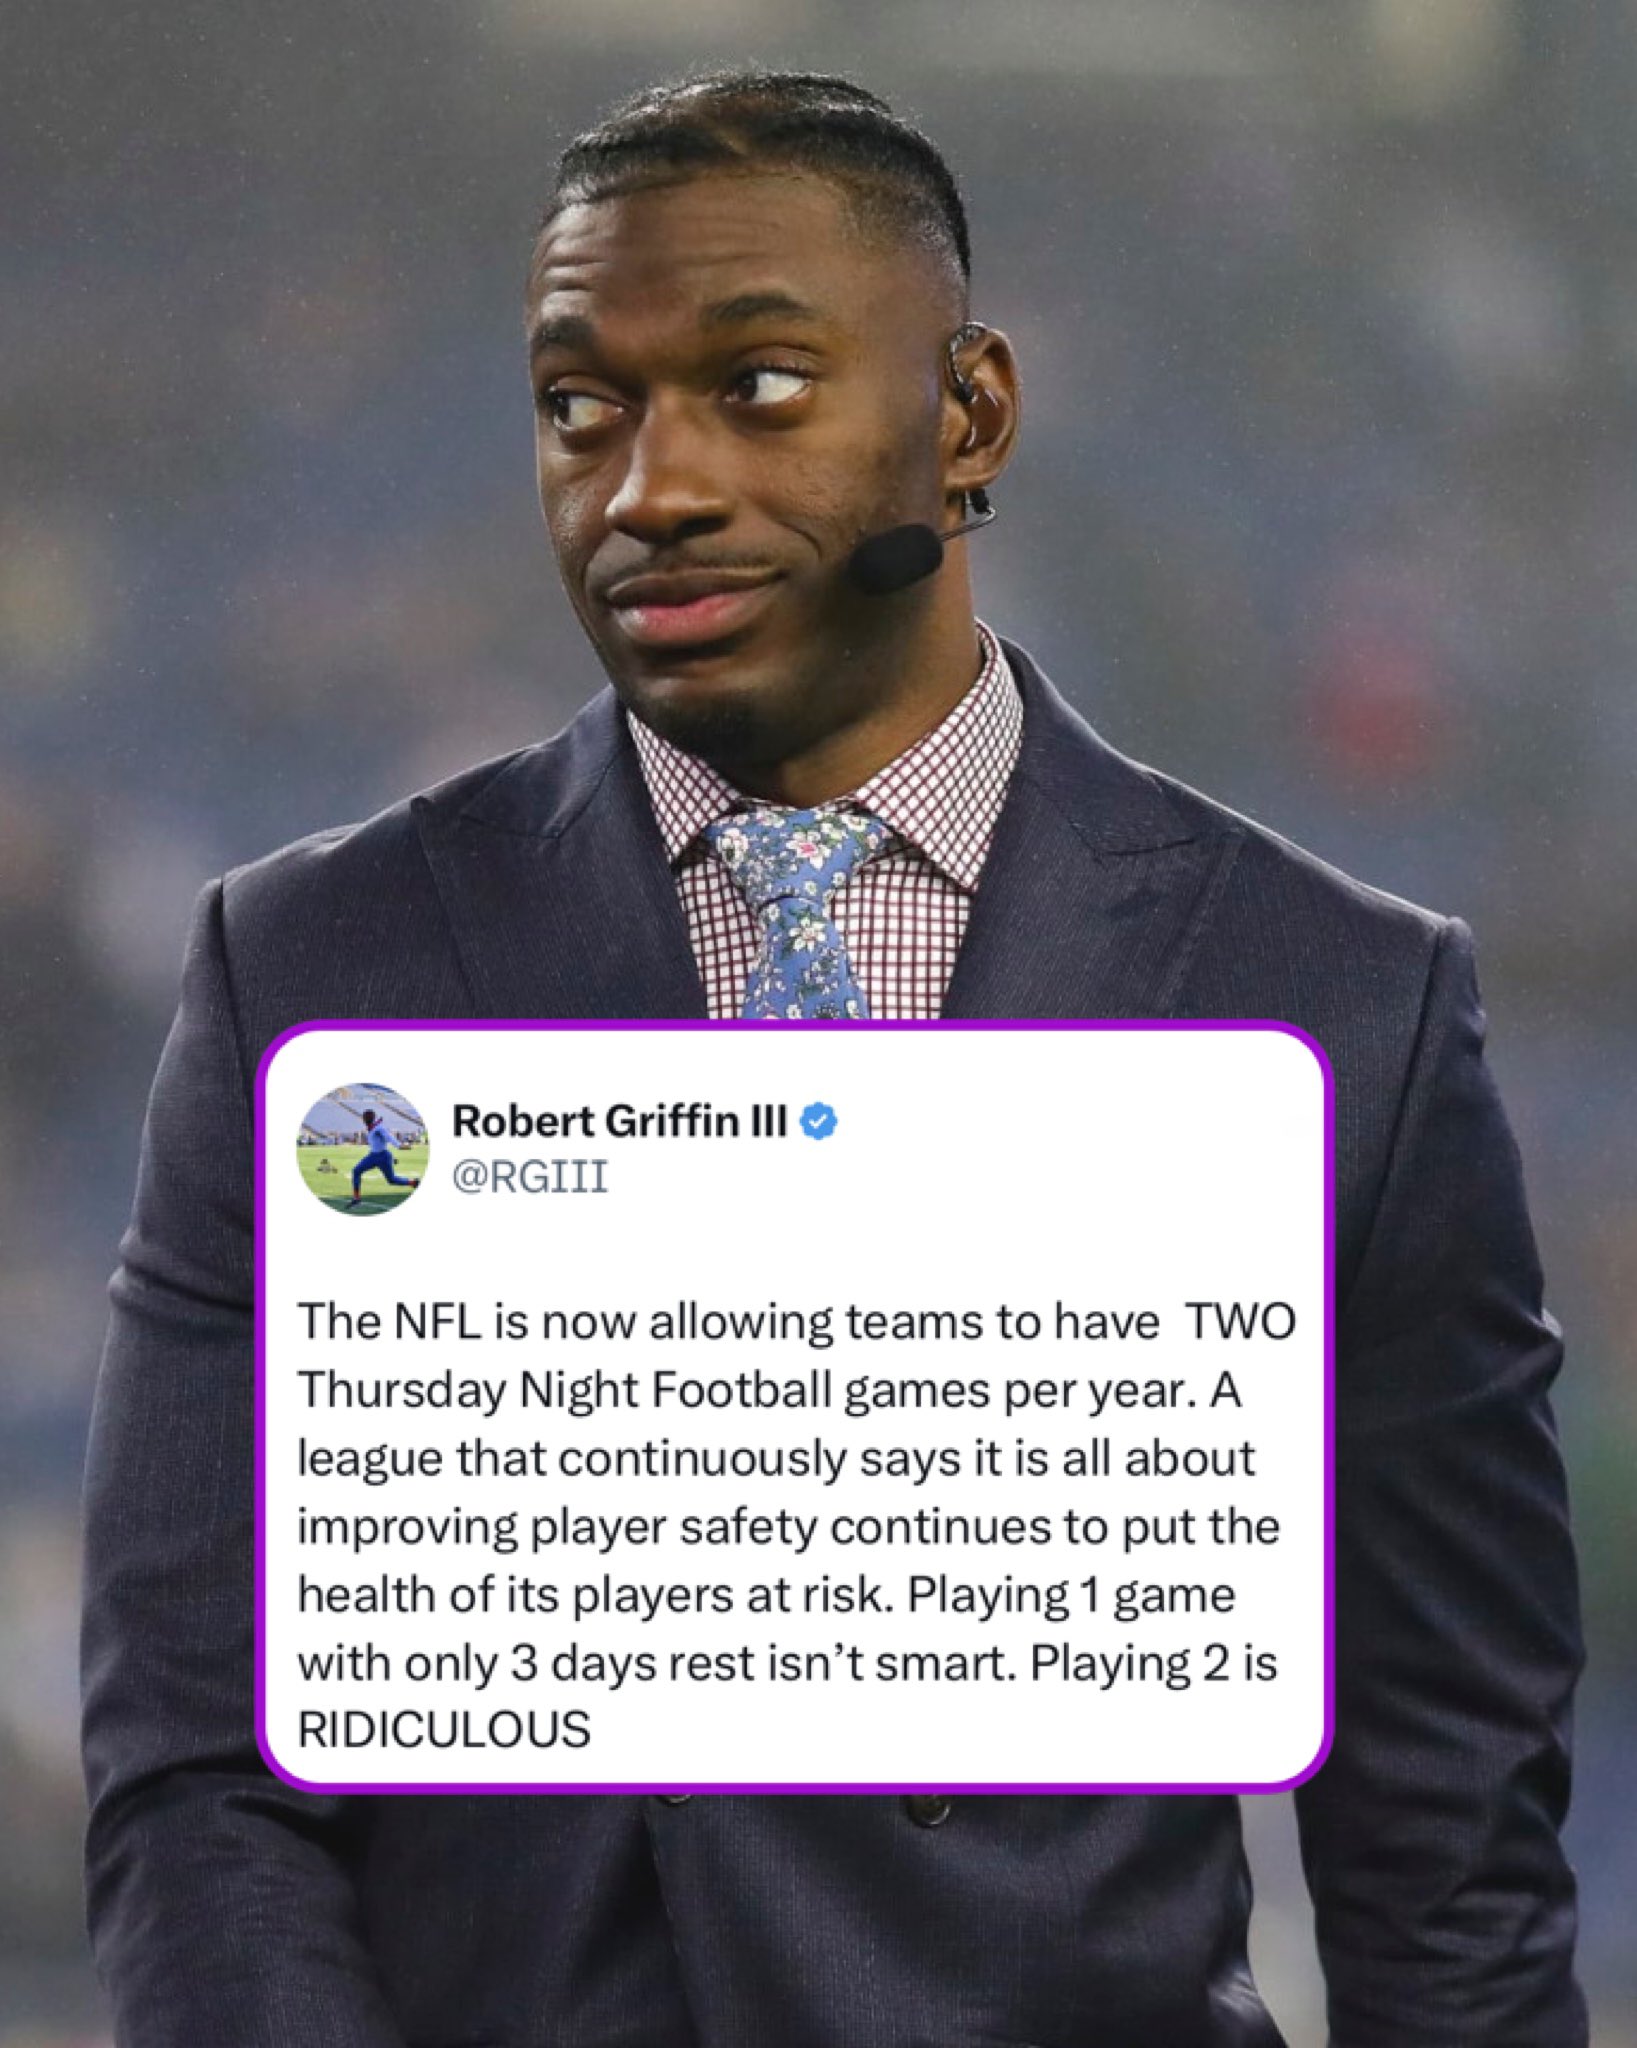 RG3] The NFL is now allowing teams to have TWO Thursday Night Football  games per year. A league that continuously says it is all about improving  player safety continues to put the